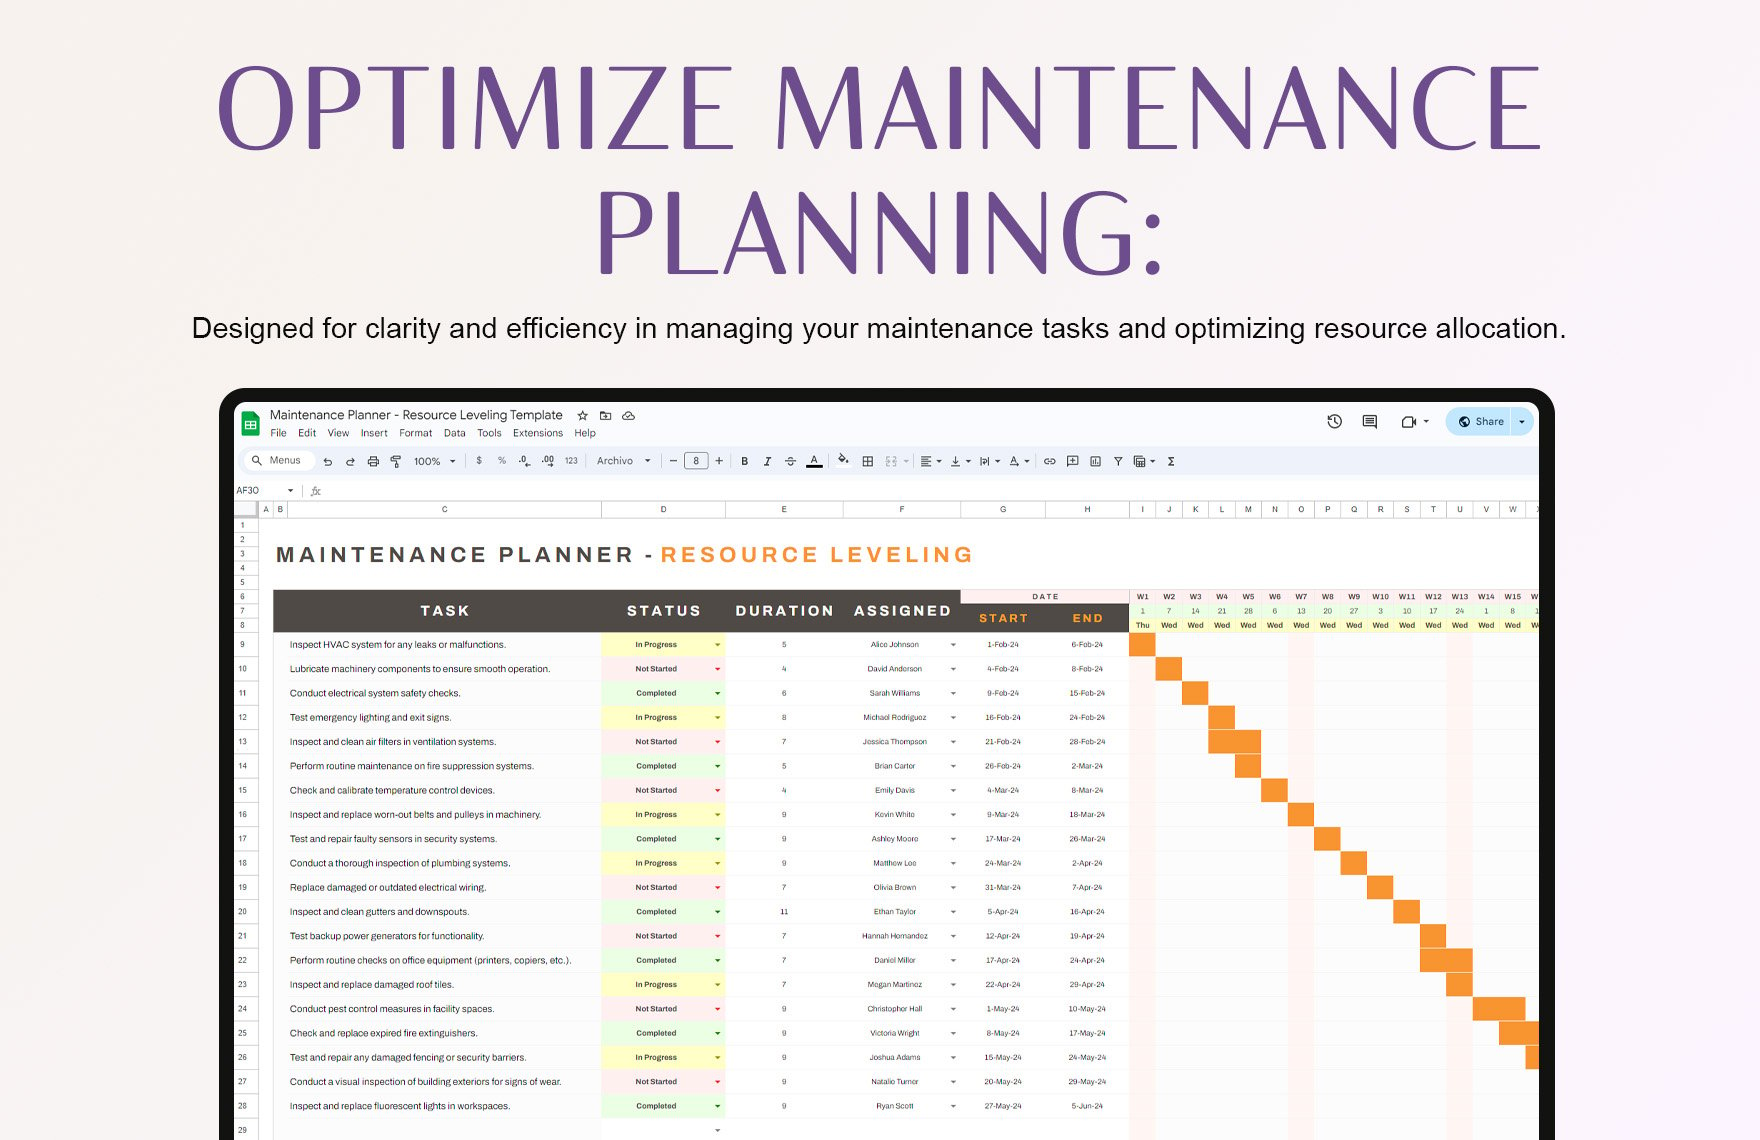 Maintenance Planner - Resource Leveling Template